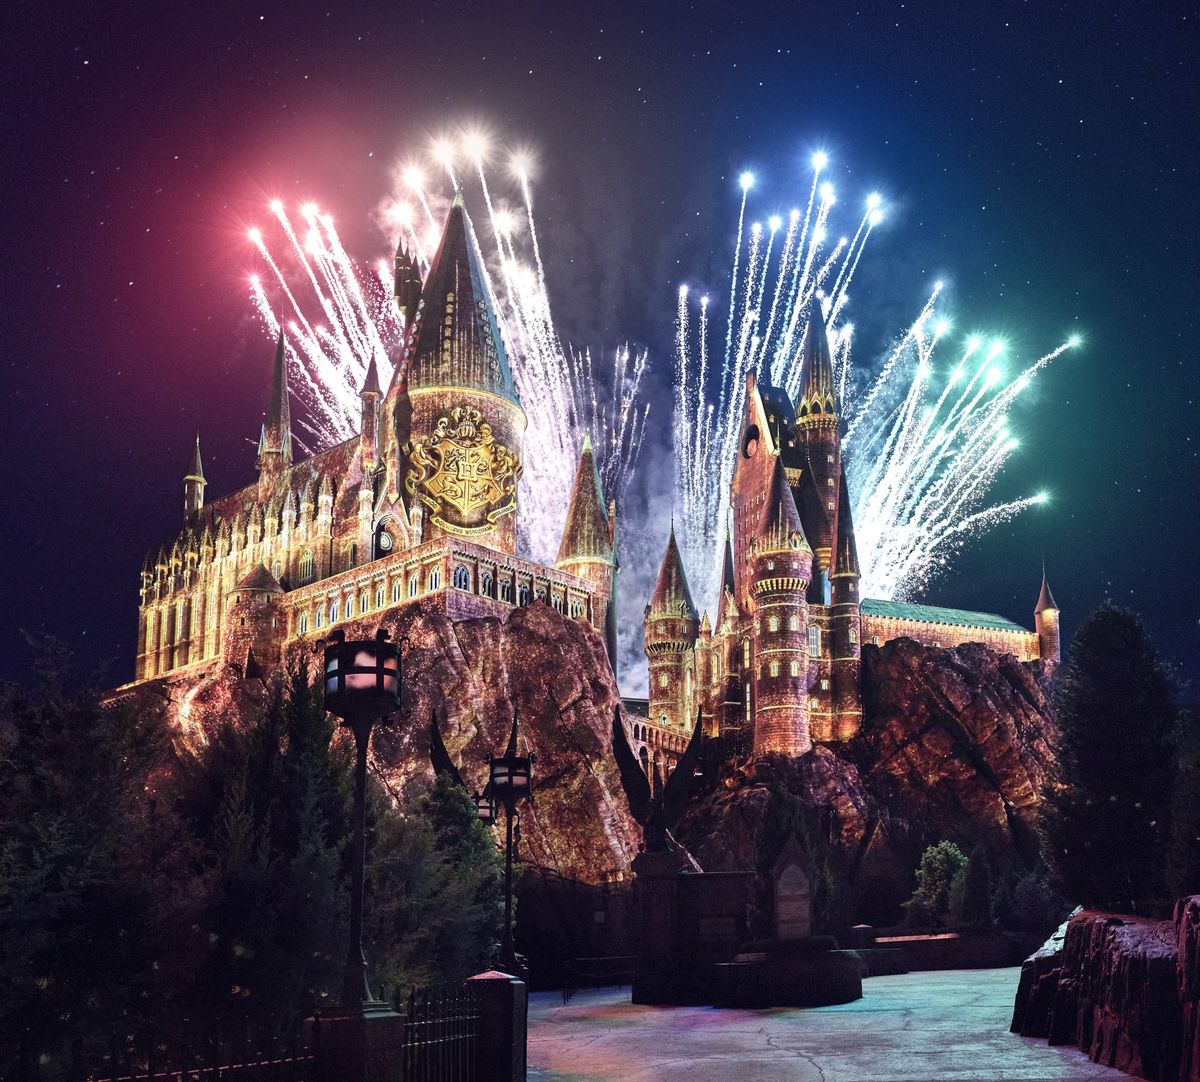 "Hogwarts Always" new Harry Potter show at Universal Islands of Adventure